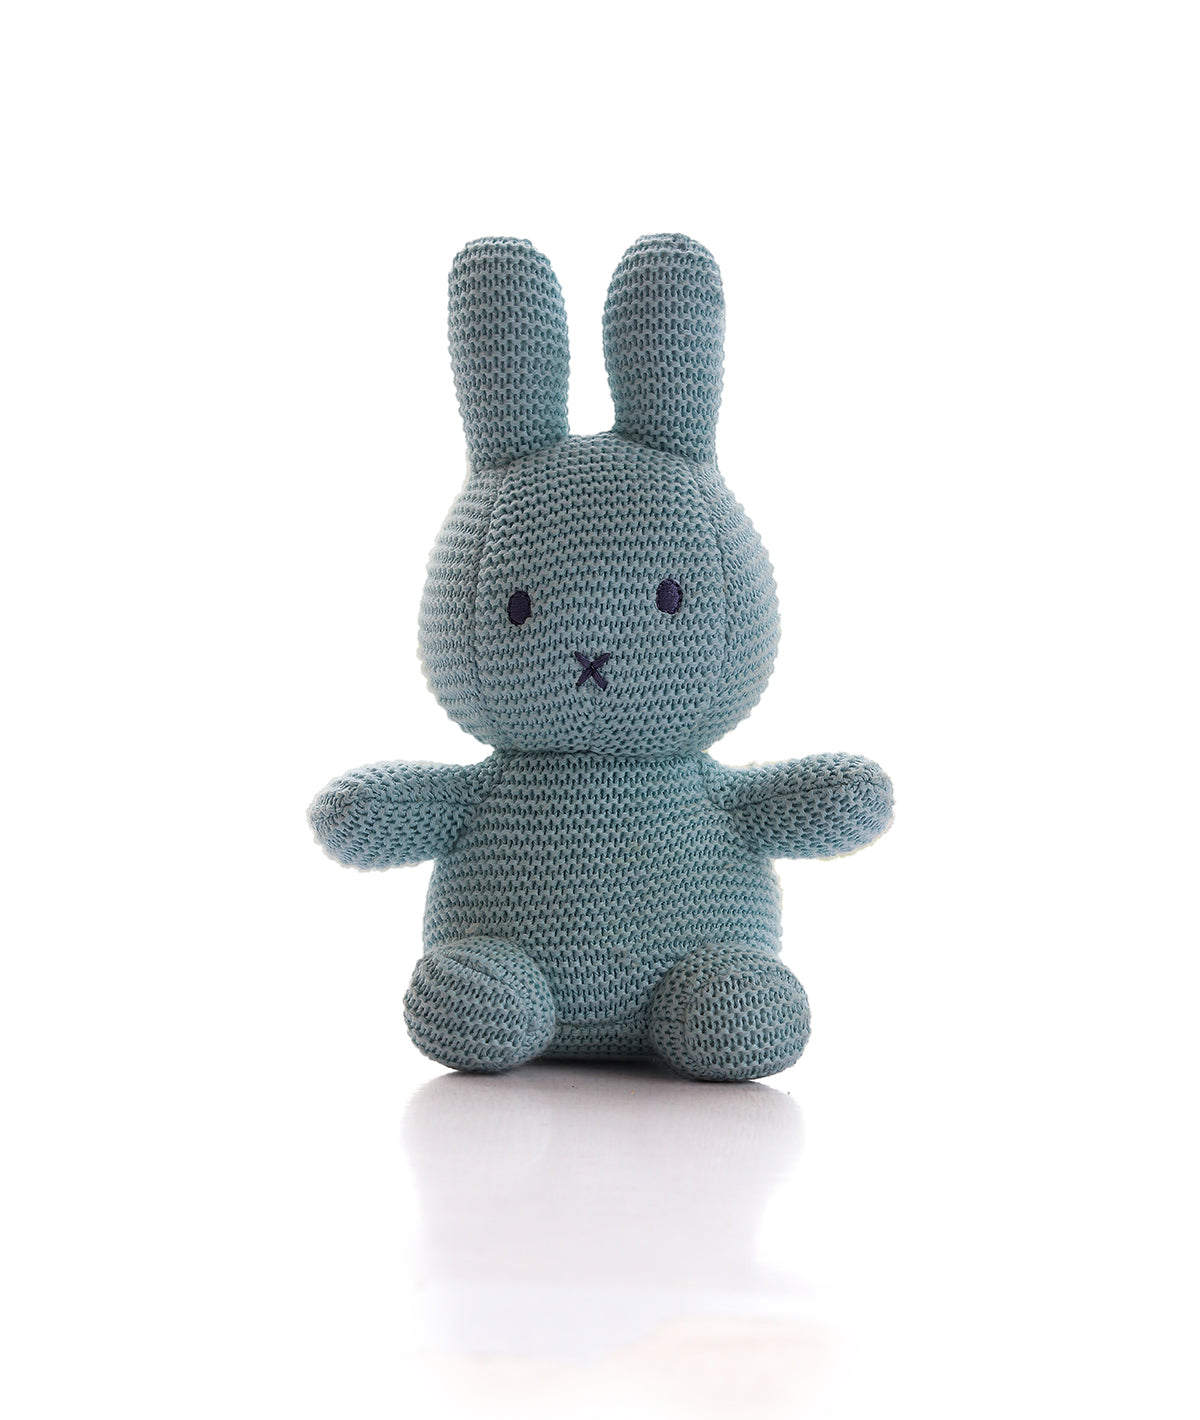 Peter Bunny Cotton Knitted Stuffed Soft Toy for Babies & Kids (Sky Blue)